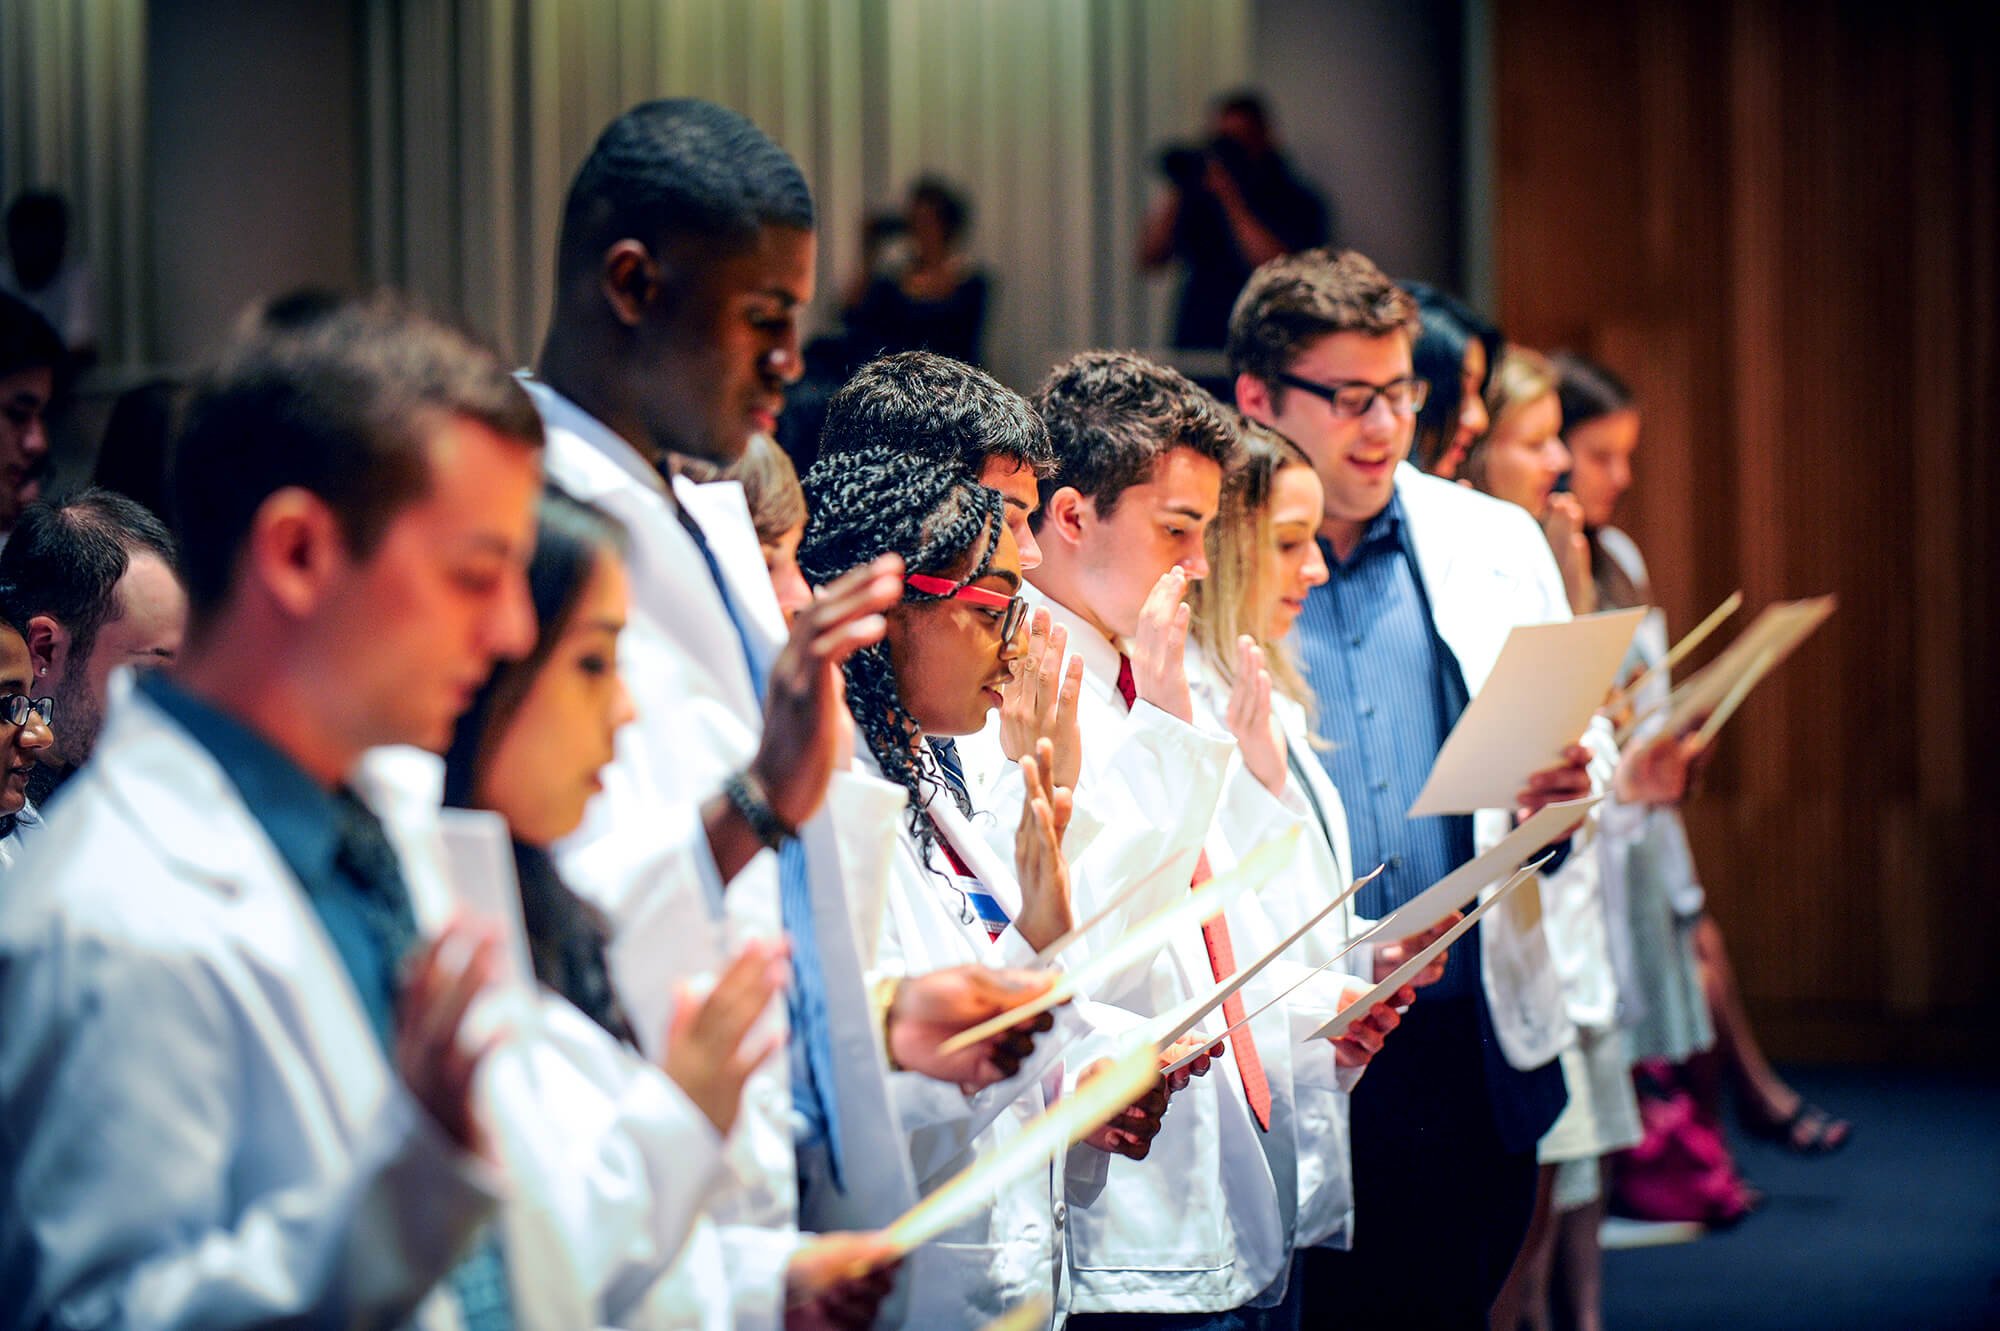 Student pharmacists in white coats reciting the Oath of a Pharmacist.